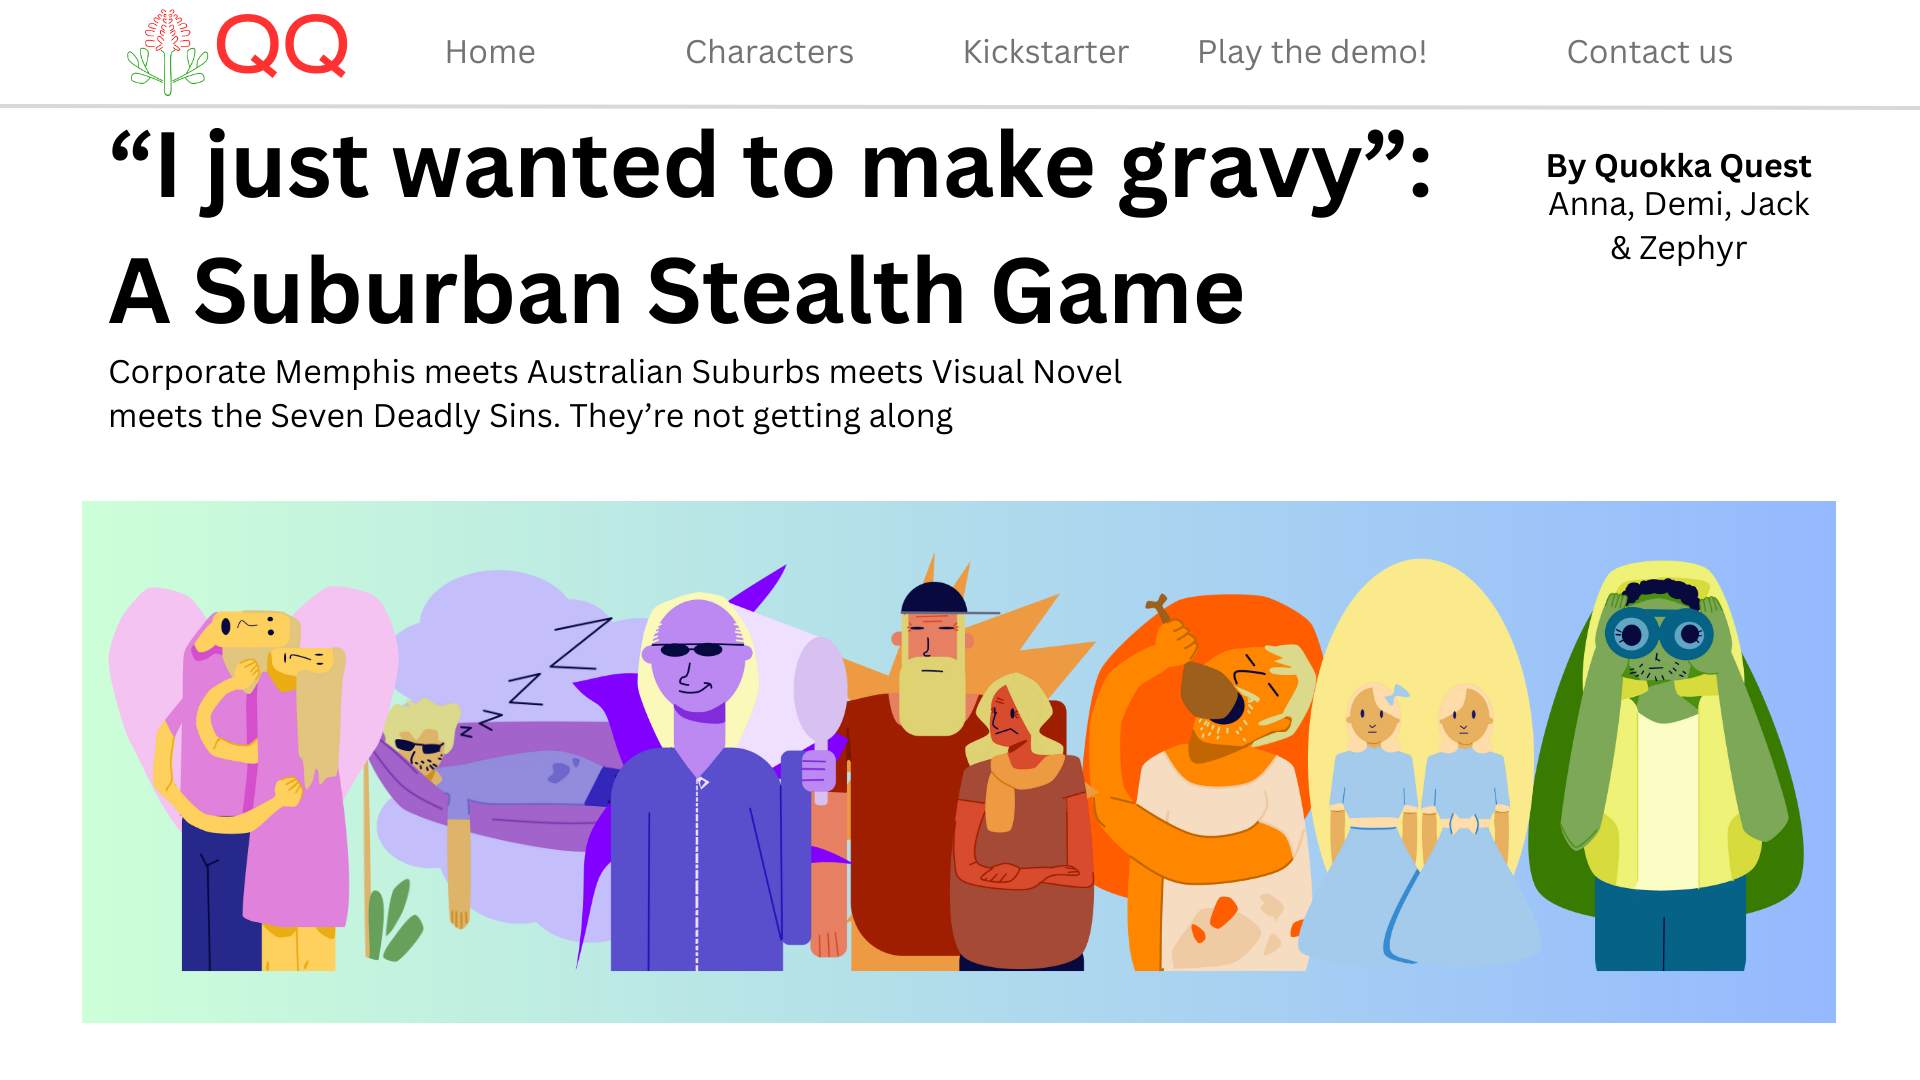 I JUST WANT TO MAKE GRAVY: A suburban stealth game